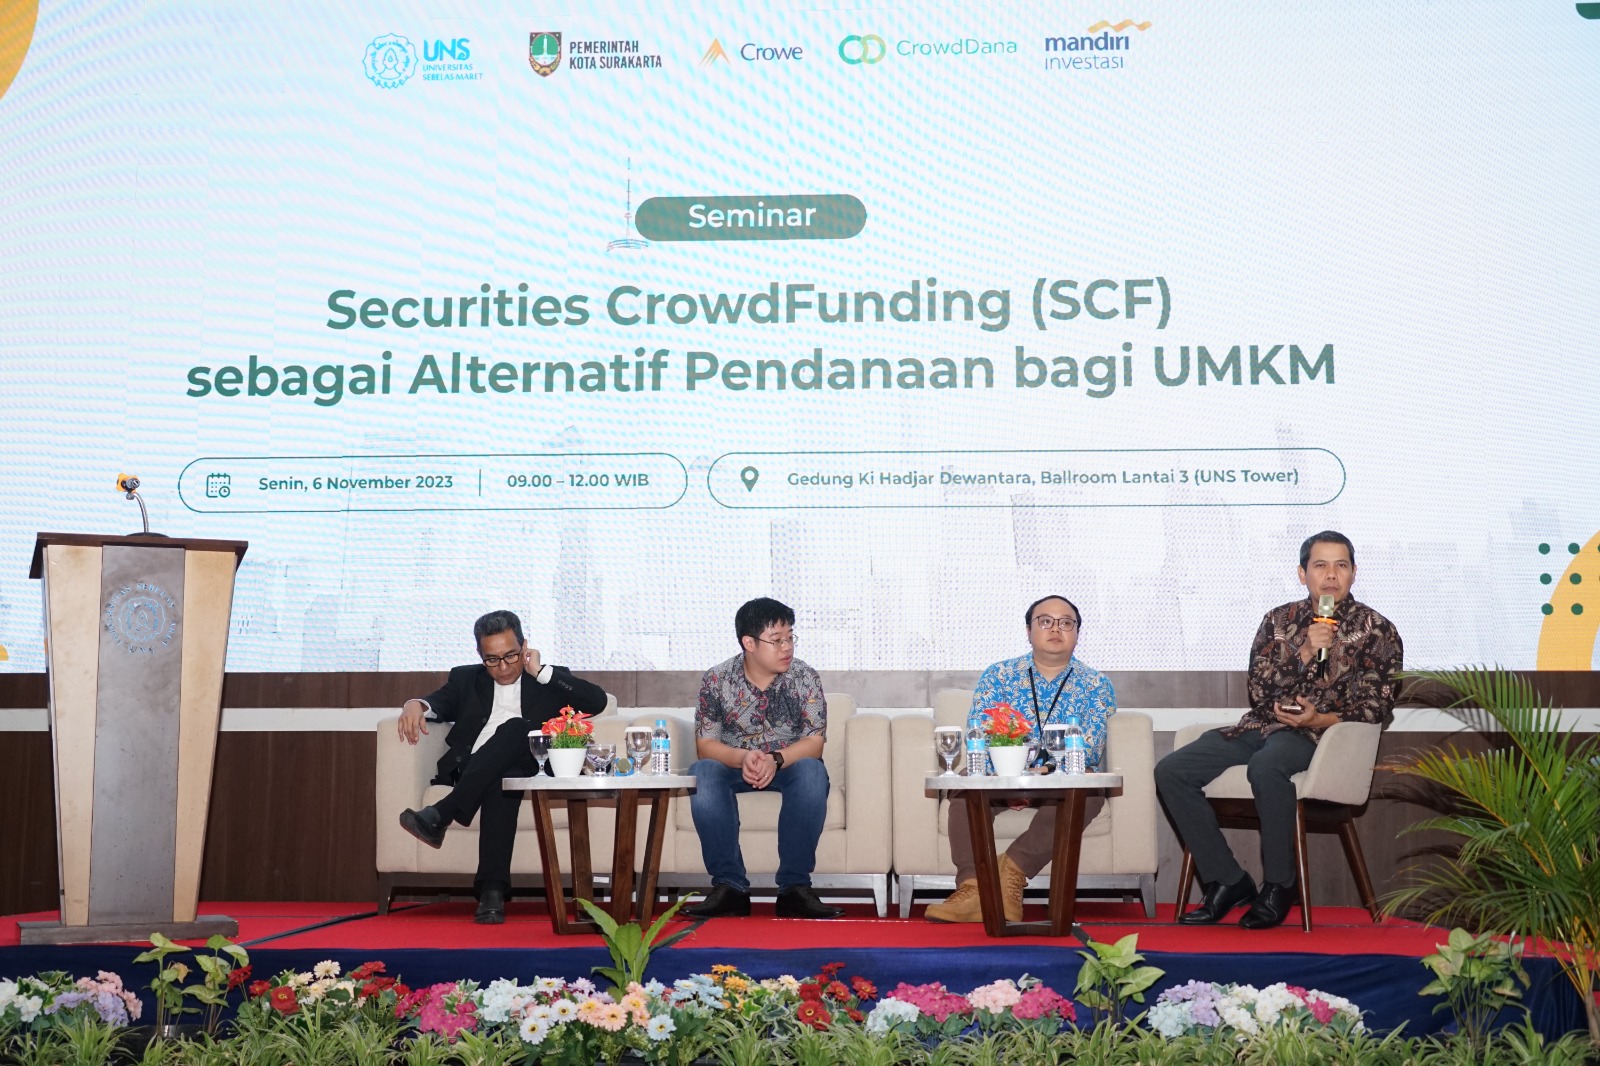 Three Speakers Invited to the Seminar on Securities CrowdFunding as an Alternative Funding for MSME